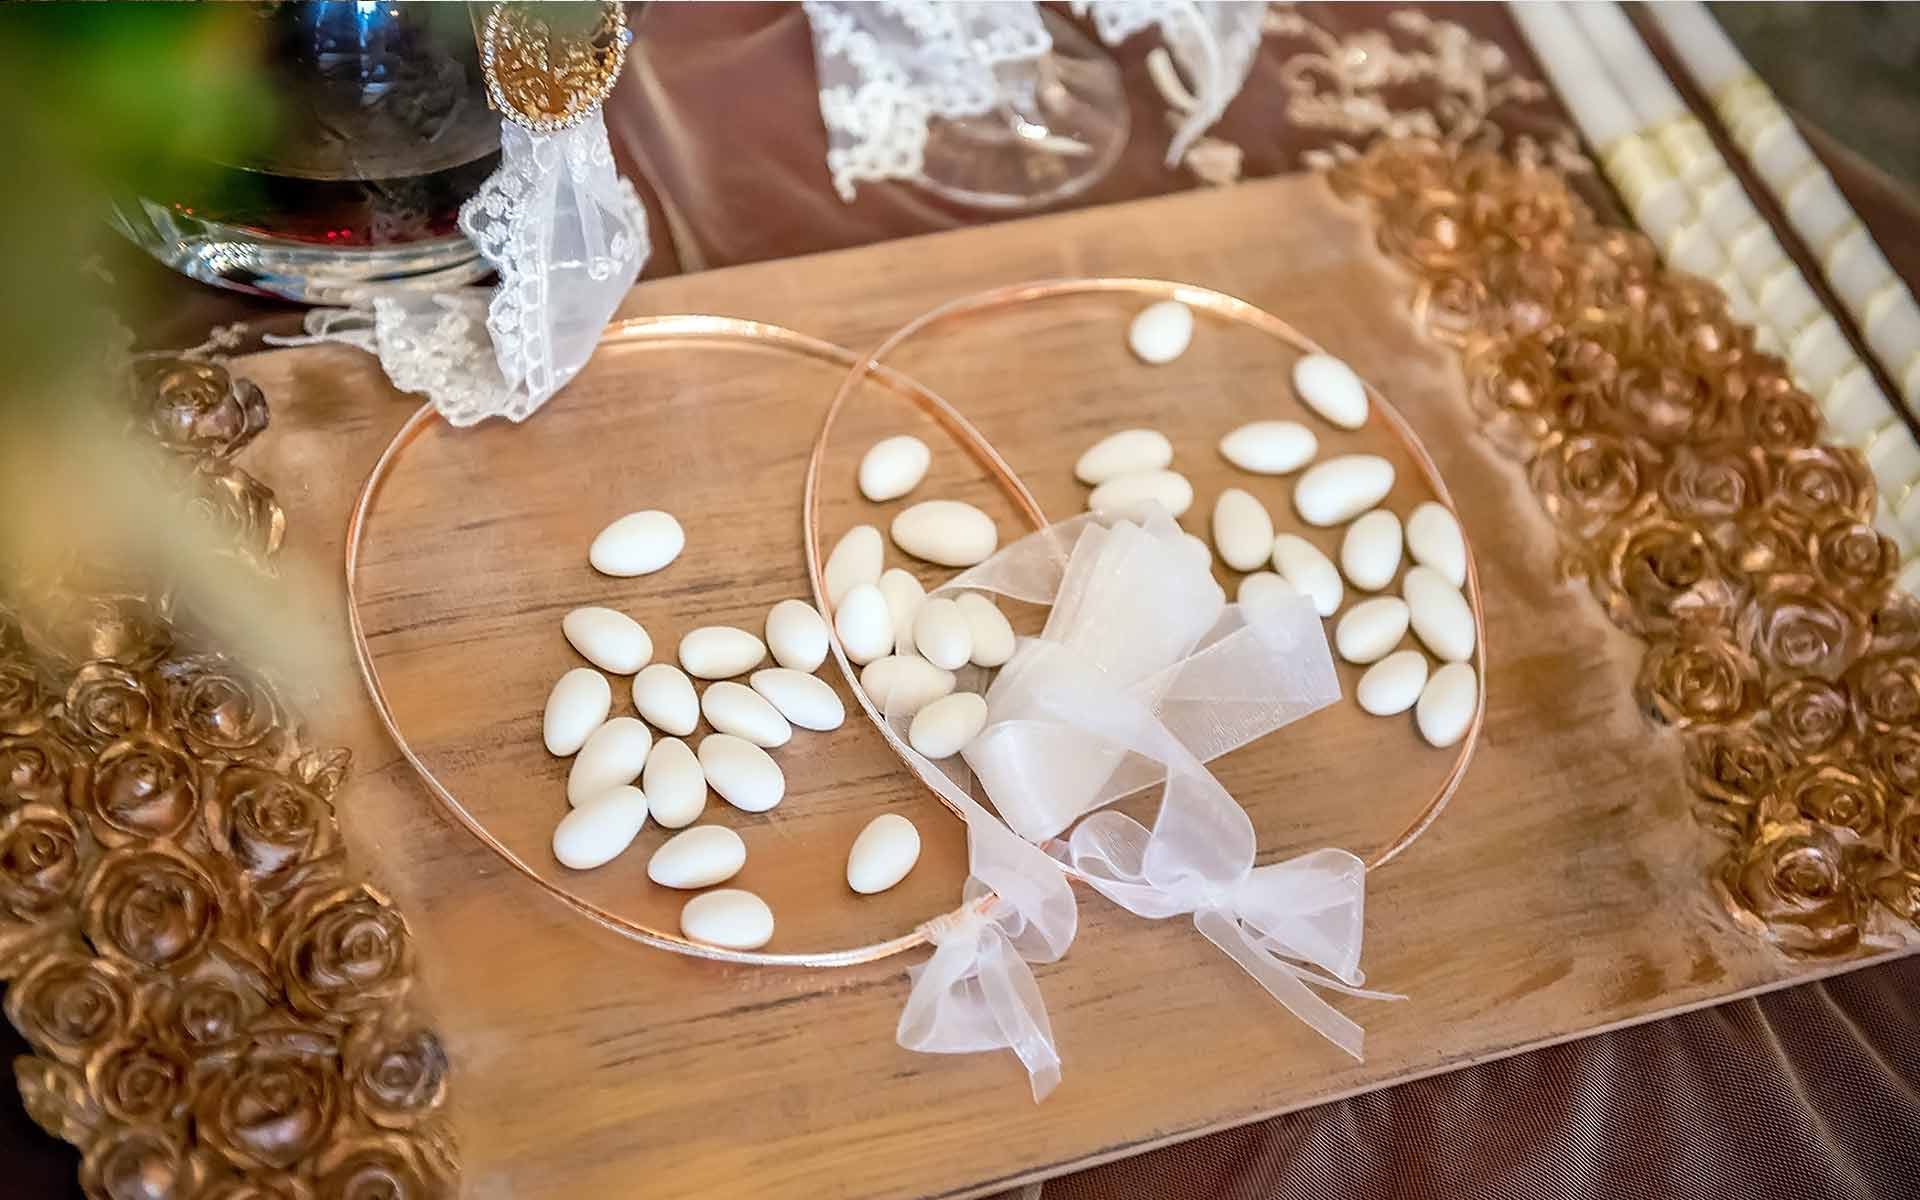 Handmade-Wooden-Serving-Round-Tray-with-Flower-Design-for-an-Orthodox-wedding